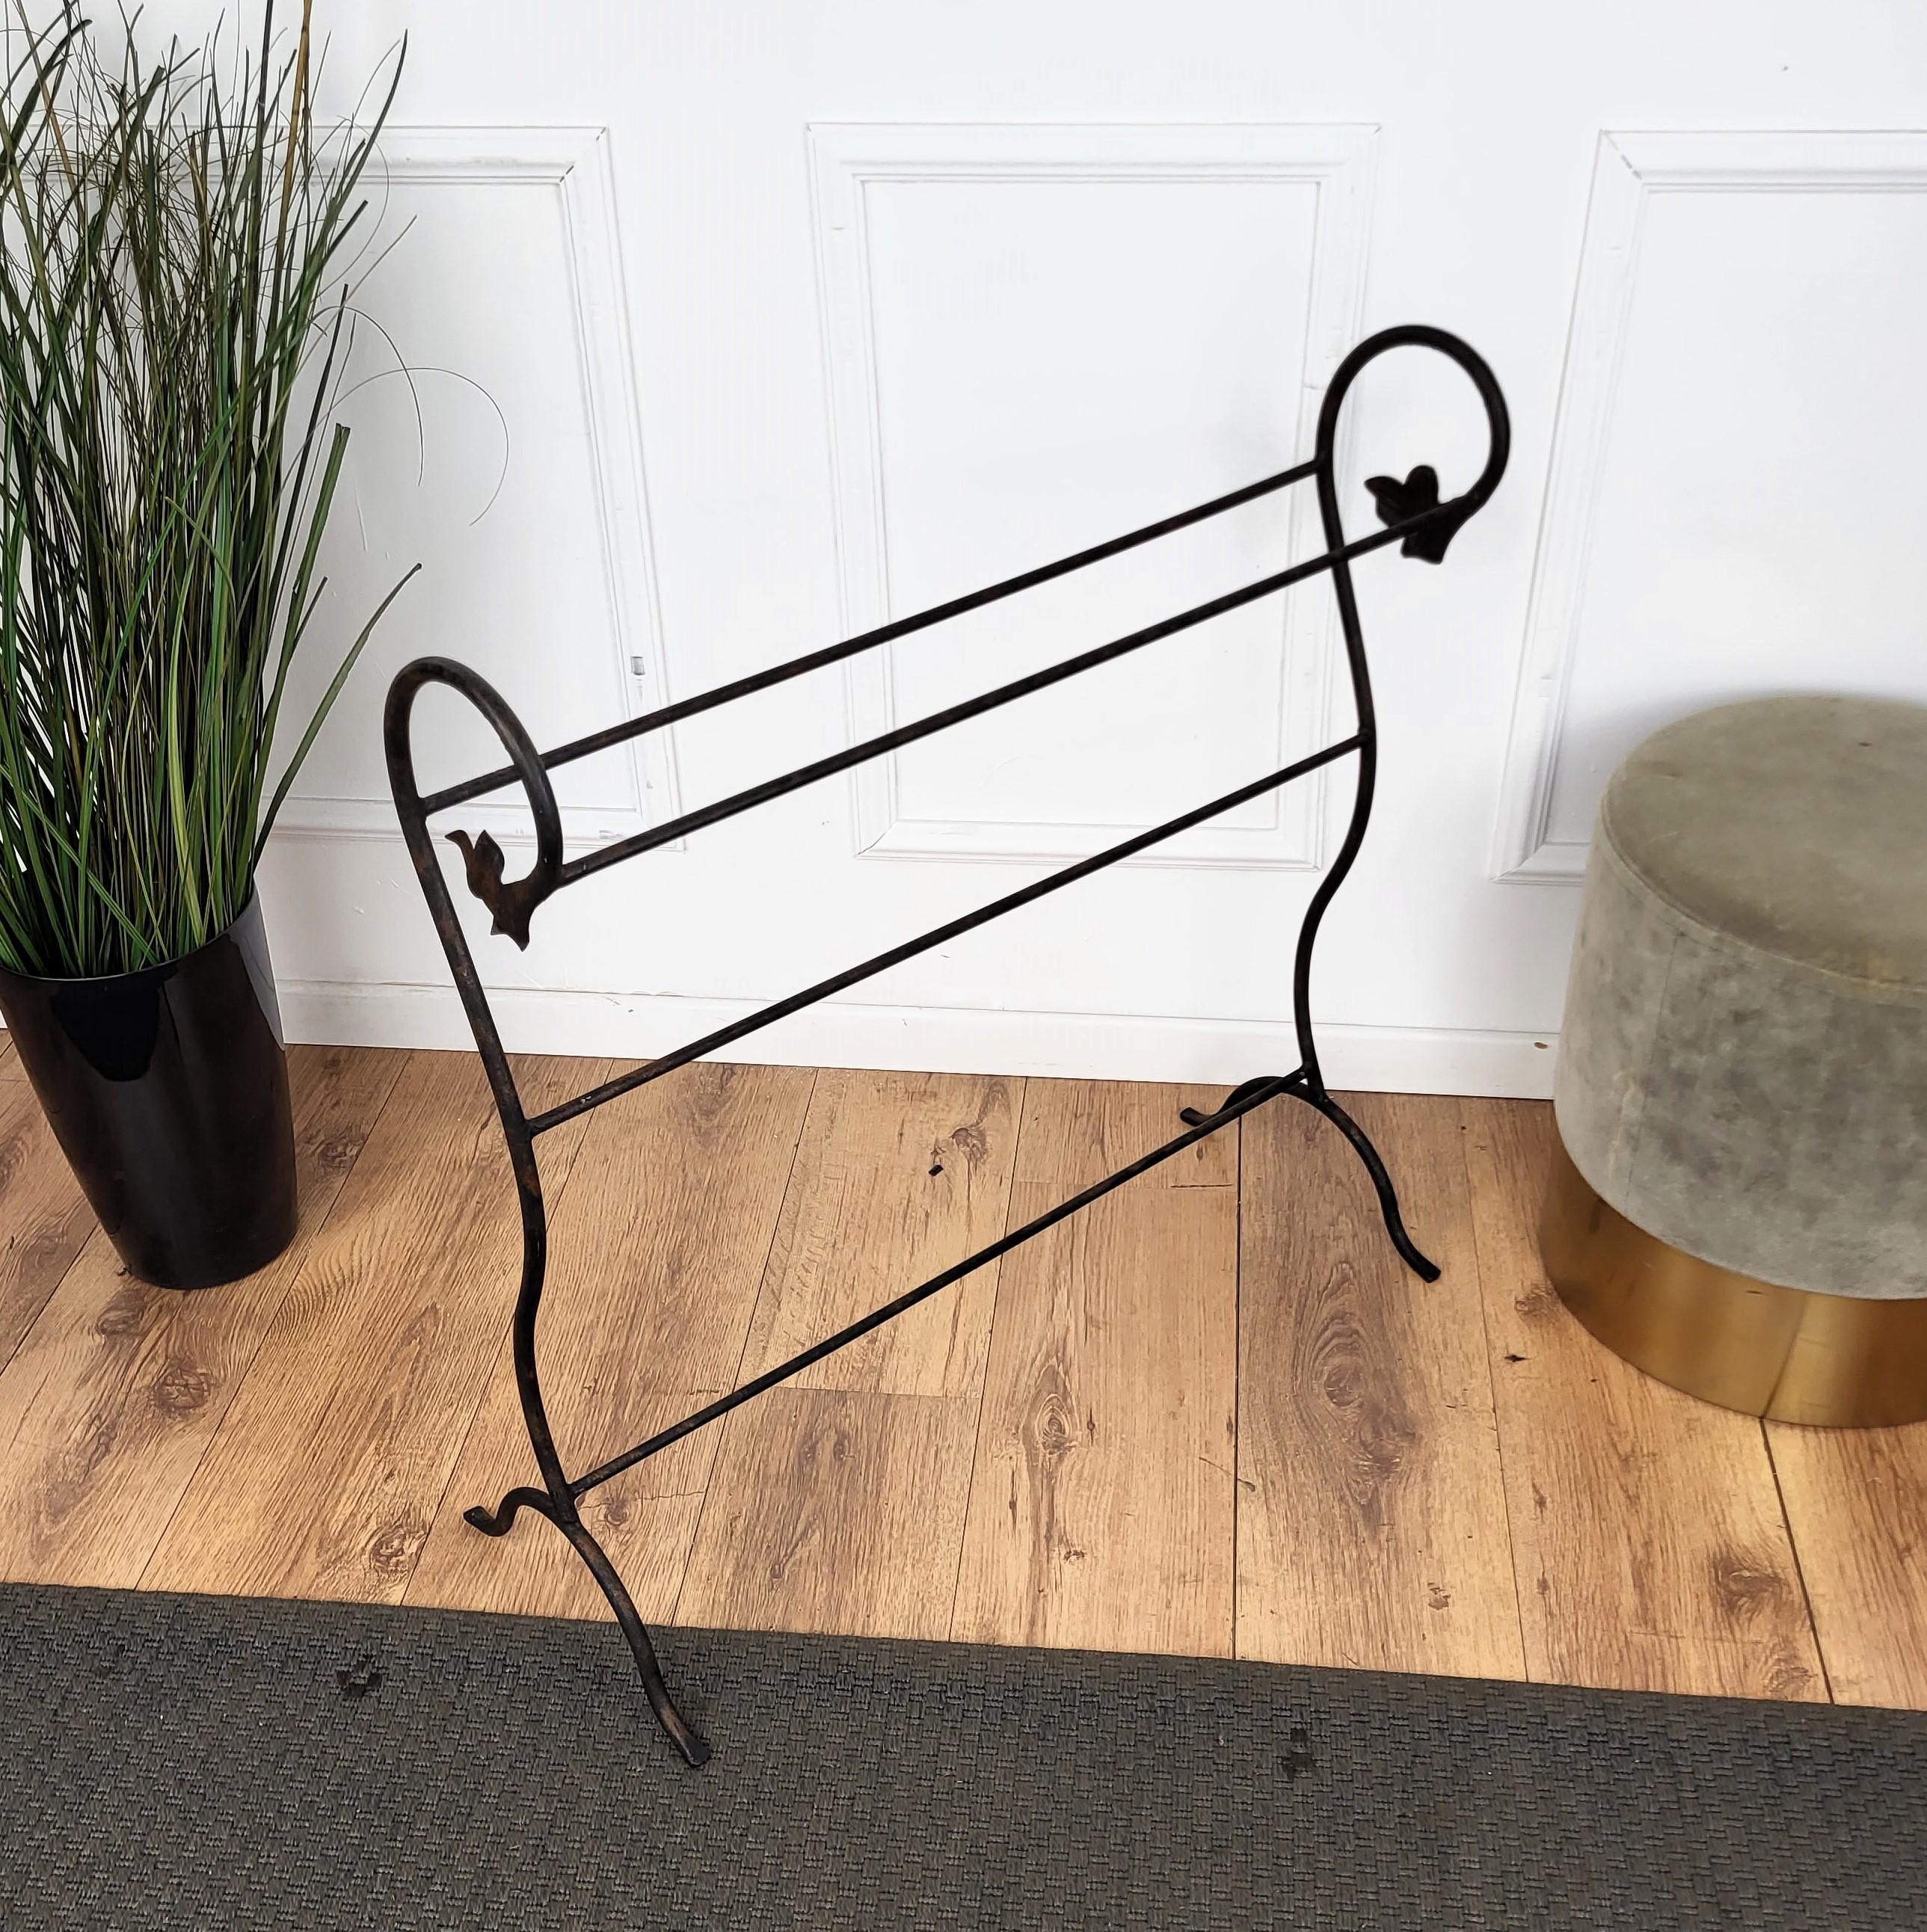 Metal Italian Wrought Iron Towel Rack Rail with Curved Leaf Decor Legs For Sale